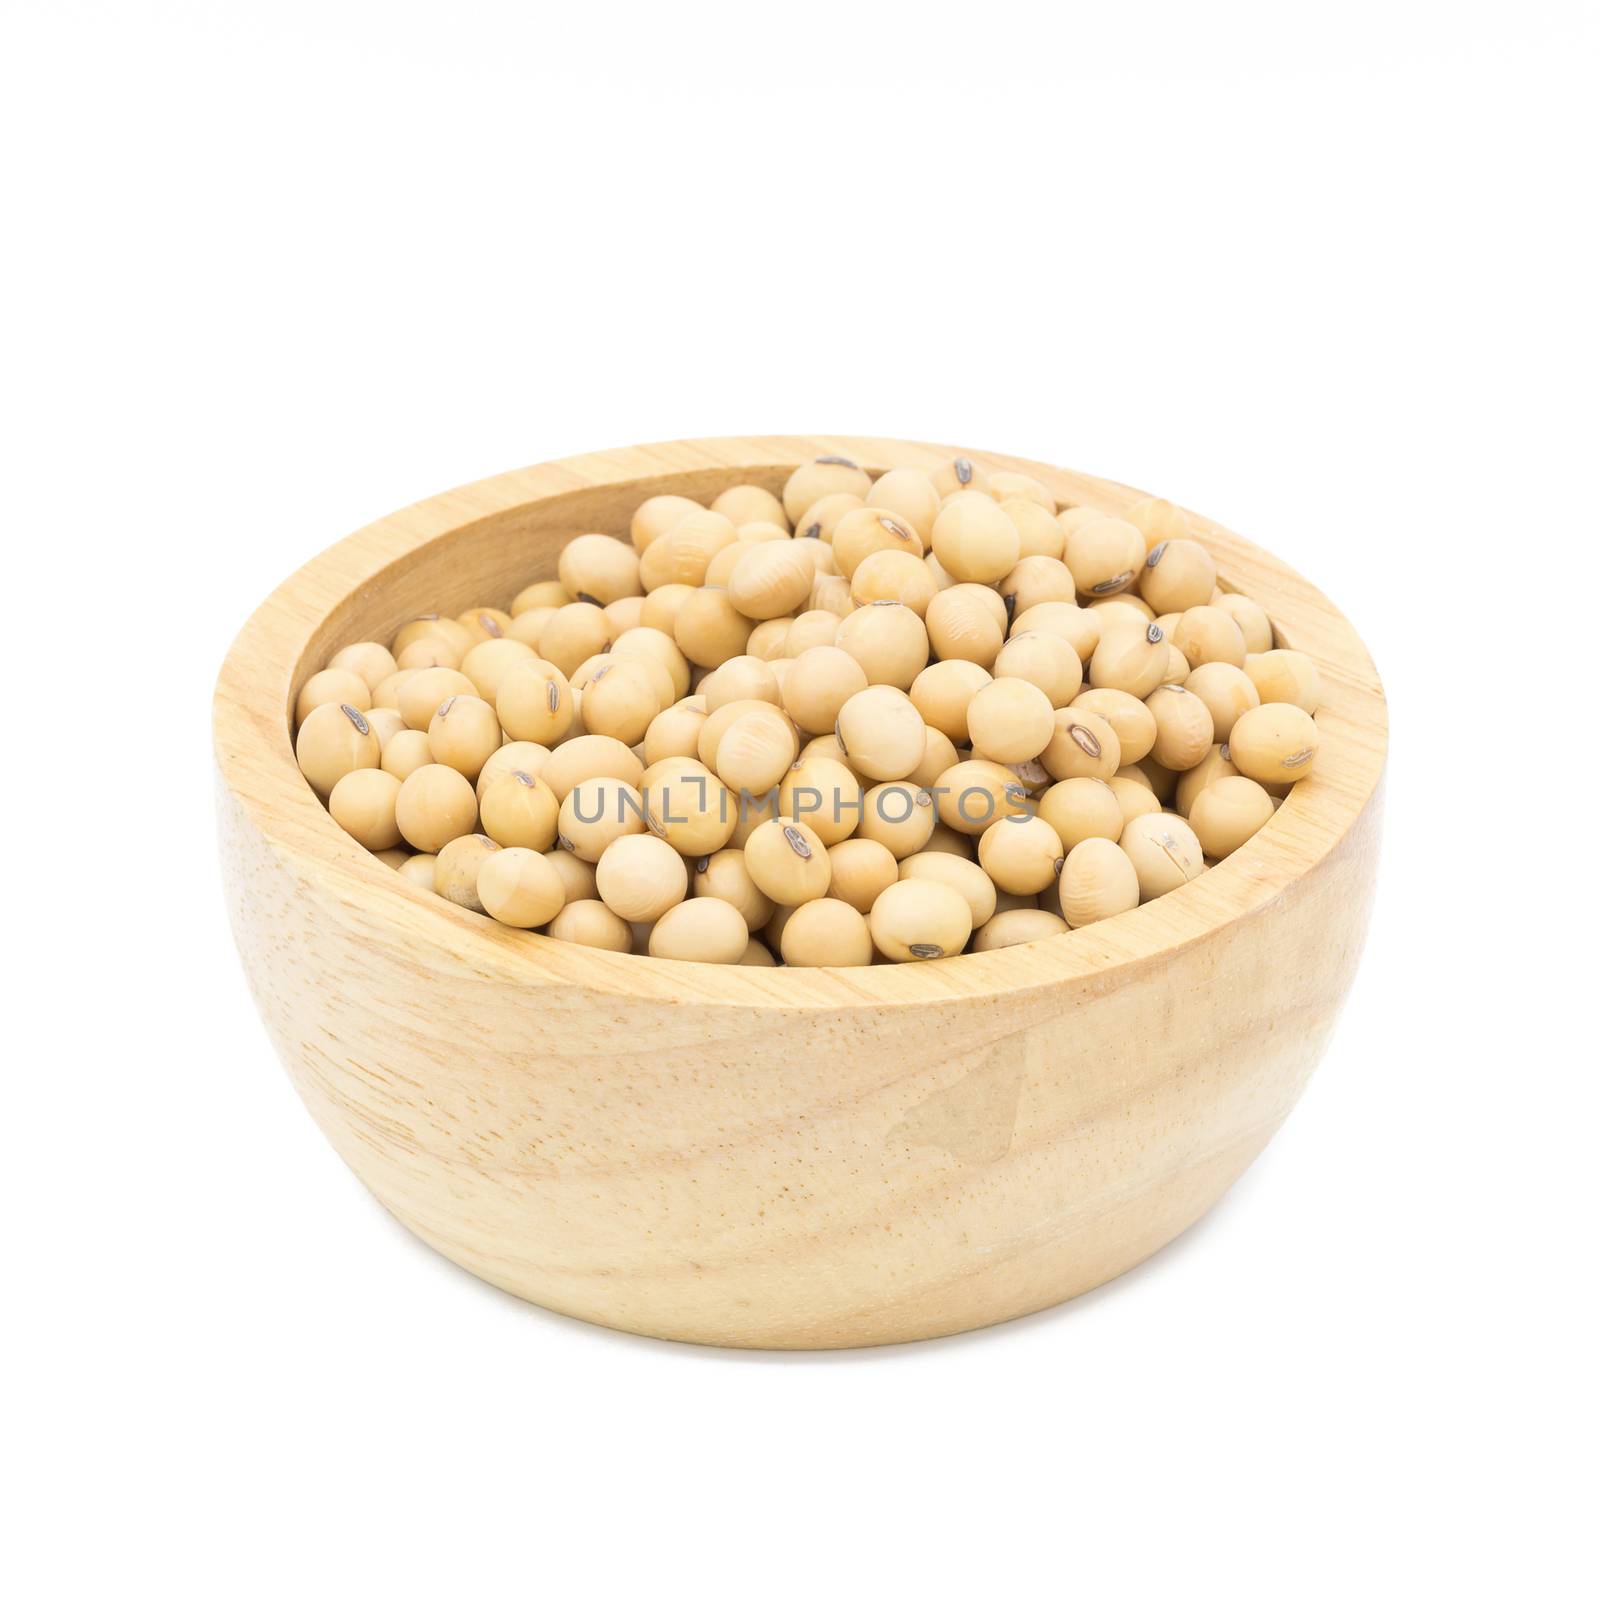 Soybeans in a wooden bowl on a white background by kaiskynet